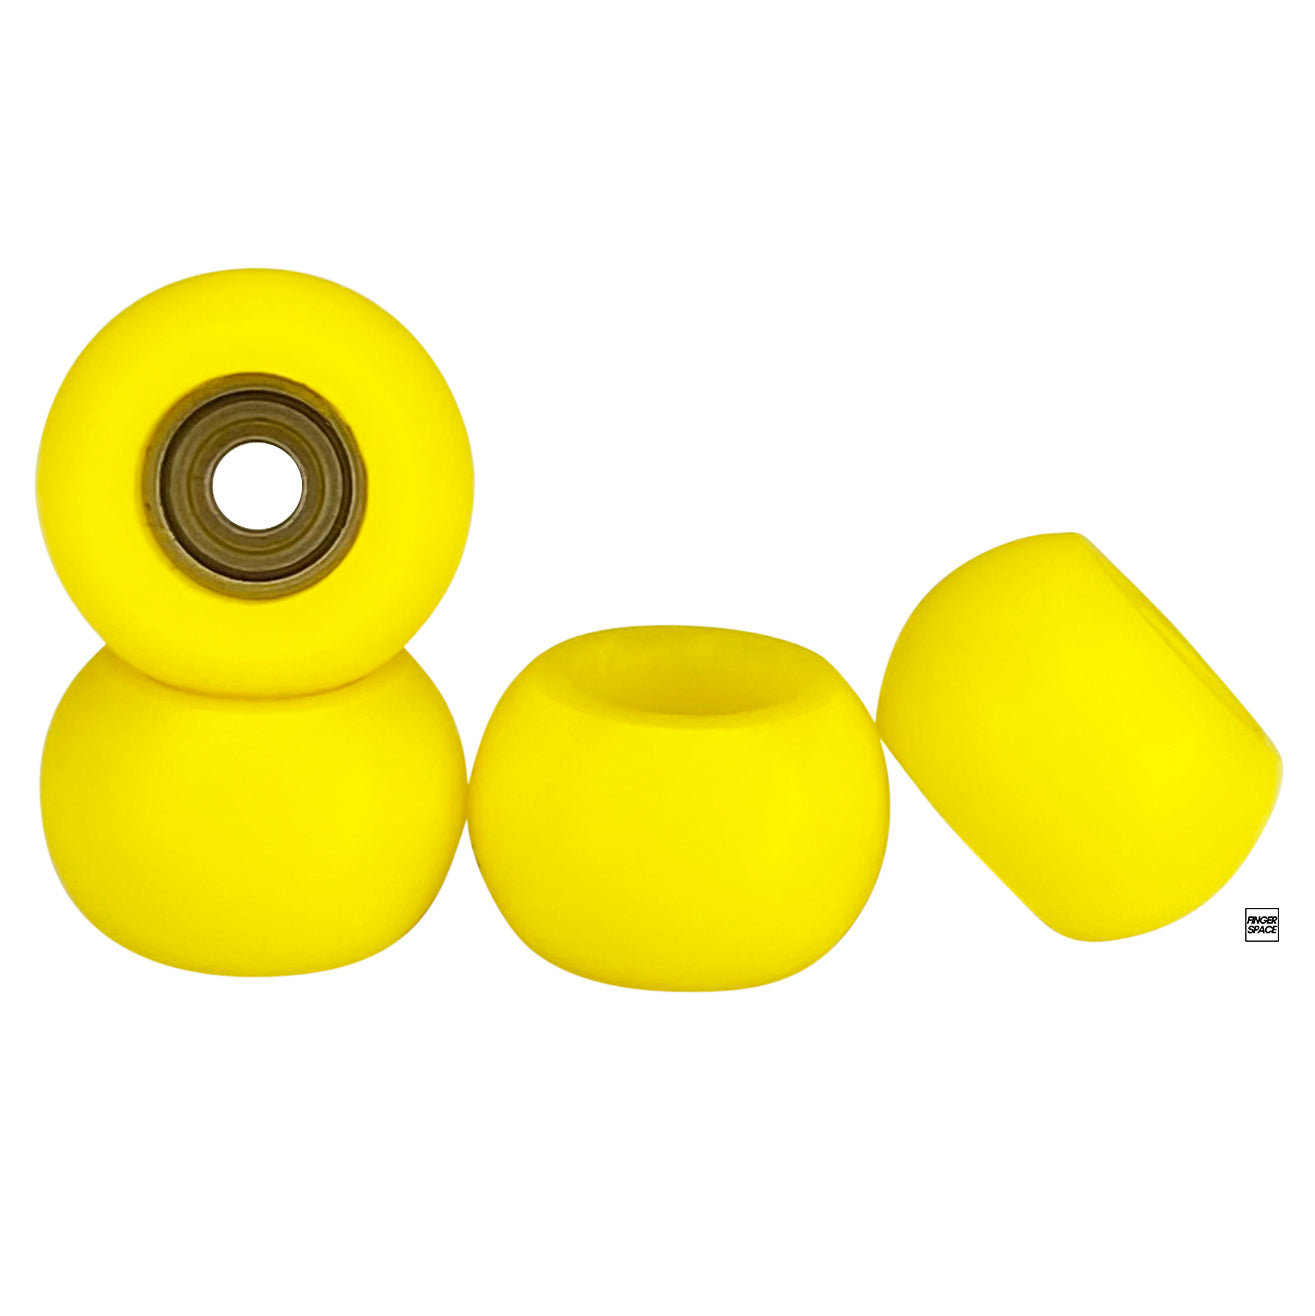 Rounded Roly Poly Wheels - "Hello Yellow" Edition